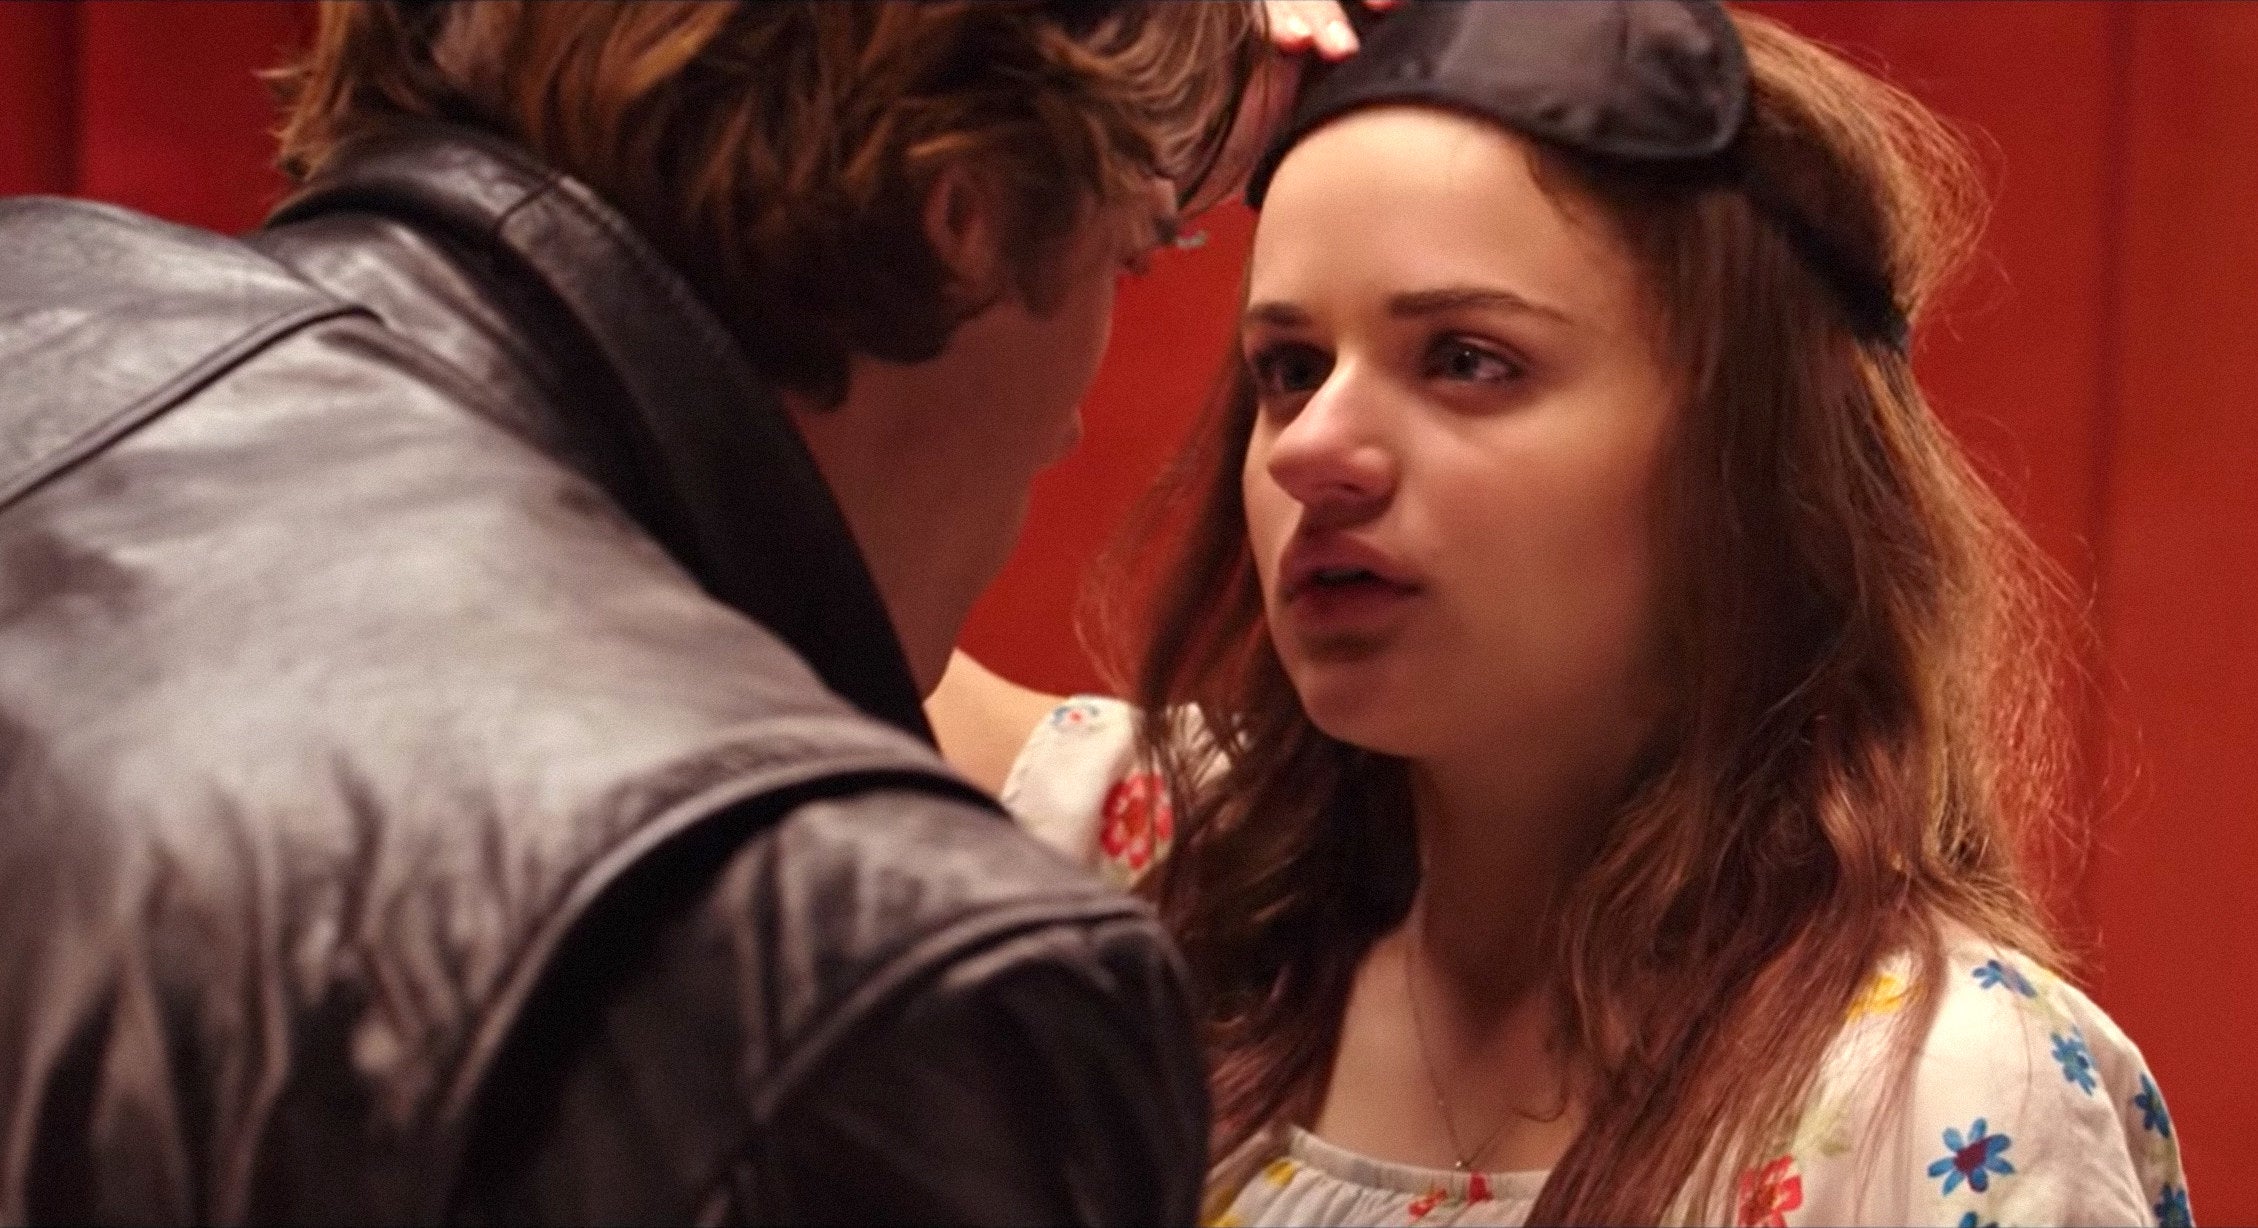 Joey King lifts a blindfold and looks surprised to see Jacob Elordi during a scene in &quot;The Kissing Booth&quot;